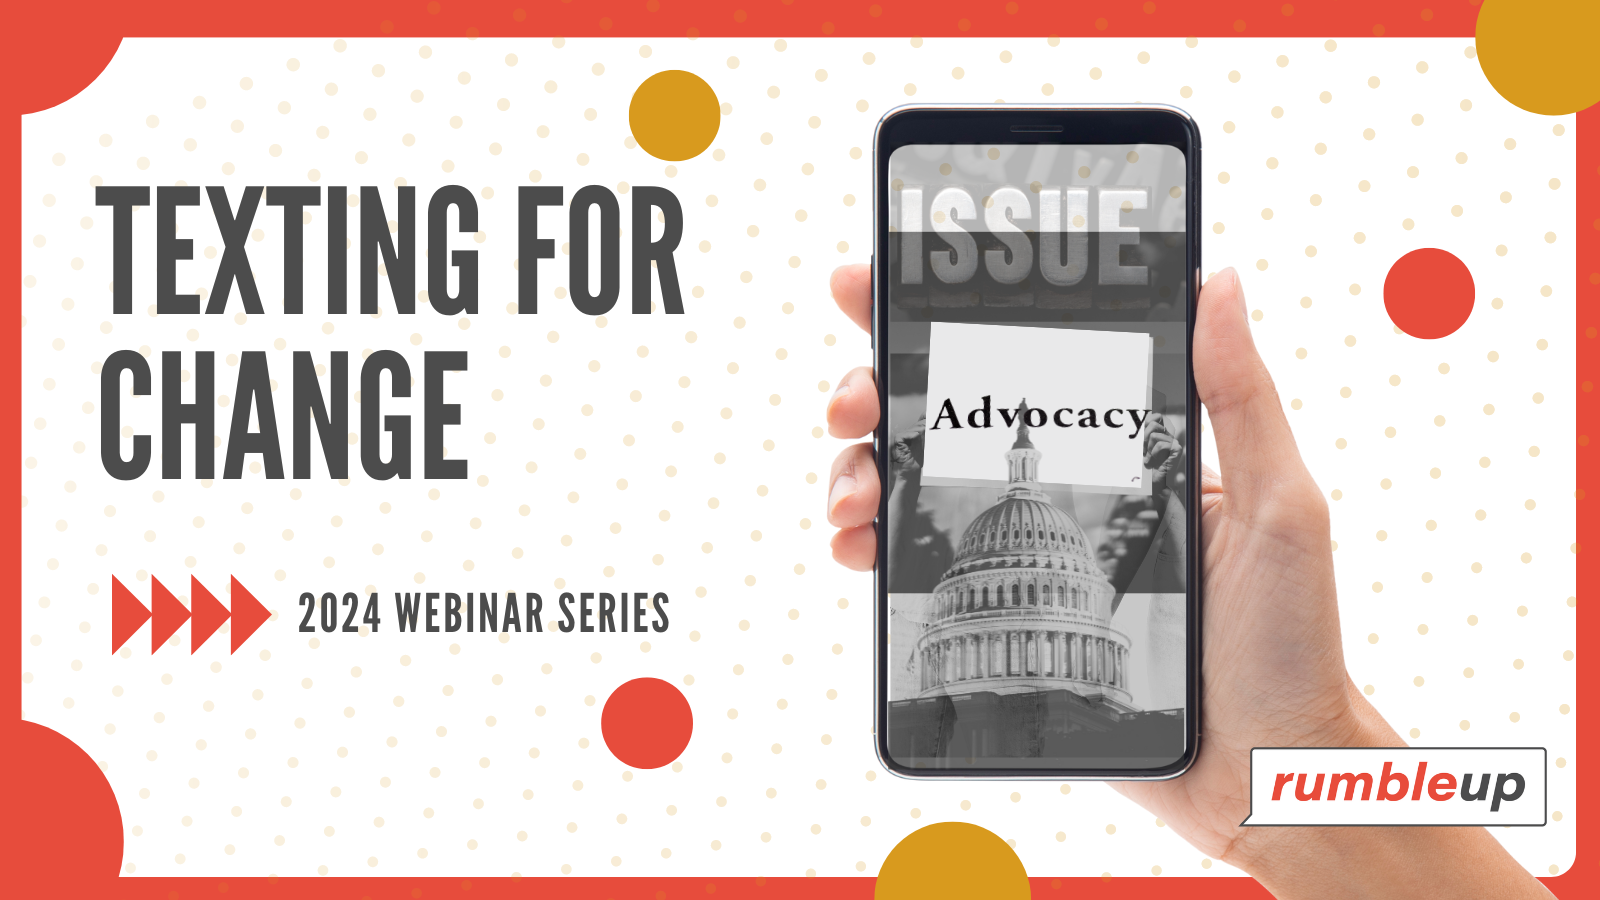 Texting For Change - Highlights from Our 2024 Webinar Series